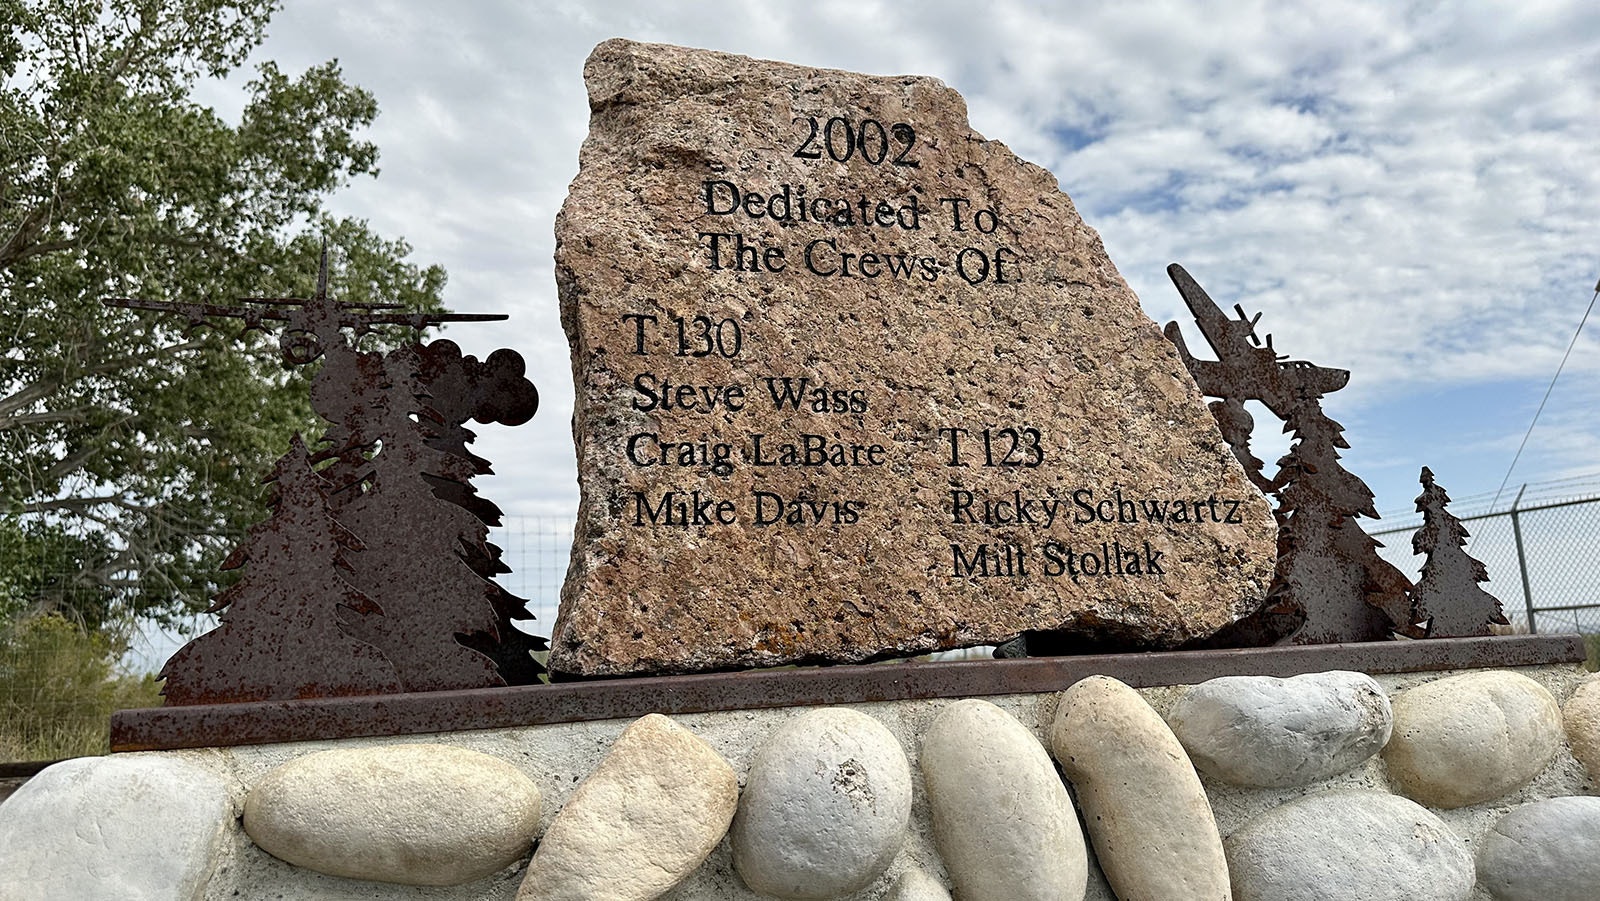 A memorial to five individuals who died fighting fires in California and Colorado in 2002. Vintage planes and flight are exhilarating, but the mission of the Museum of Flight and Aerial Firefighting is to preserve the history of aerial firefighting, which includes the real danger and real tragedies faced by firefighters on a regular basis.